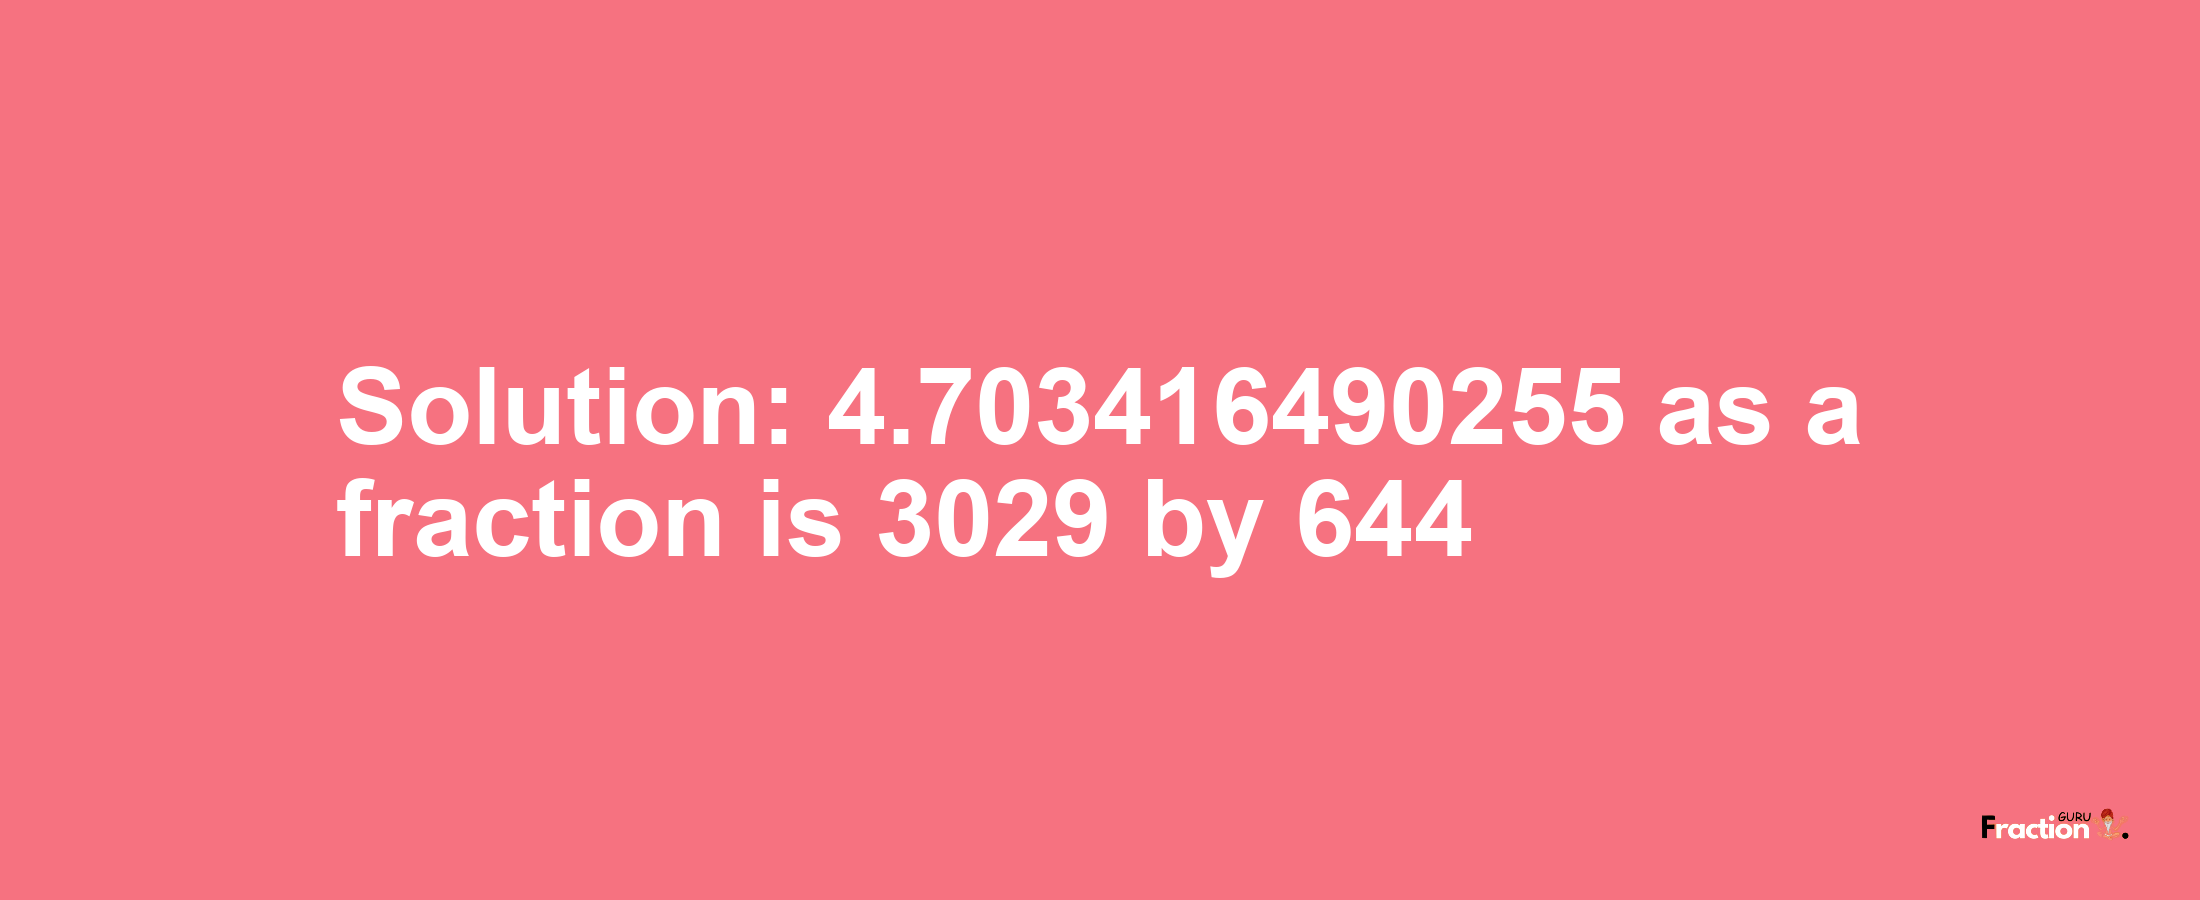 Solution:4.703416490255 as a fraction is 3029/644